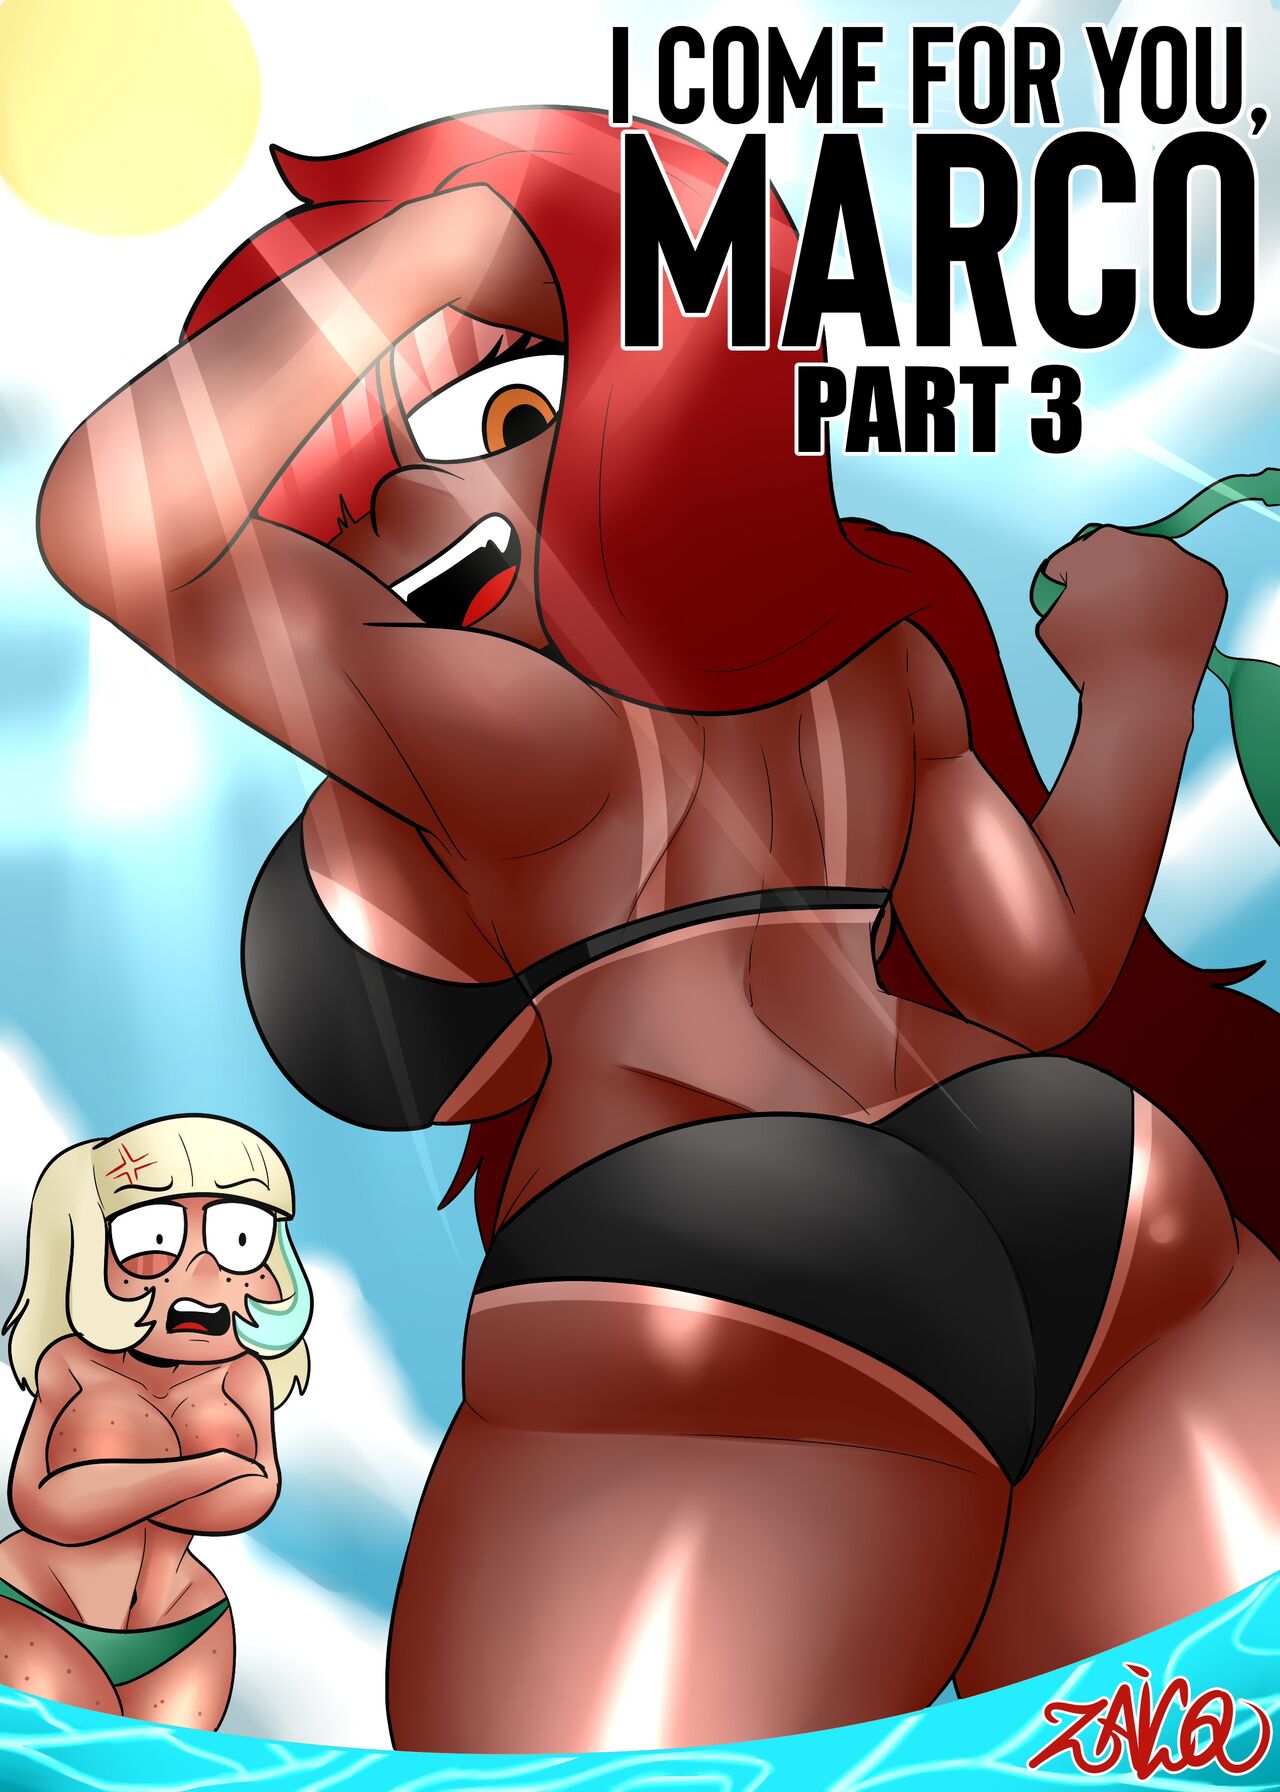 I come for you MARCO